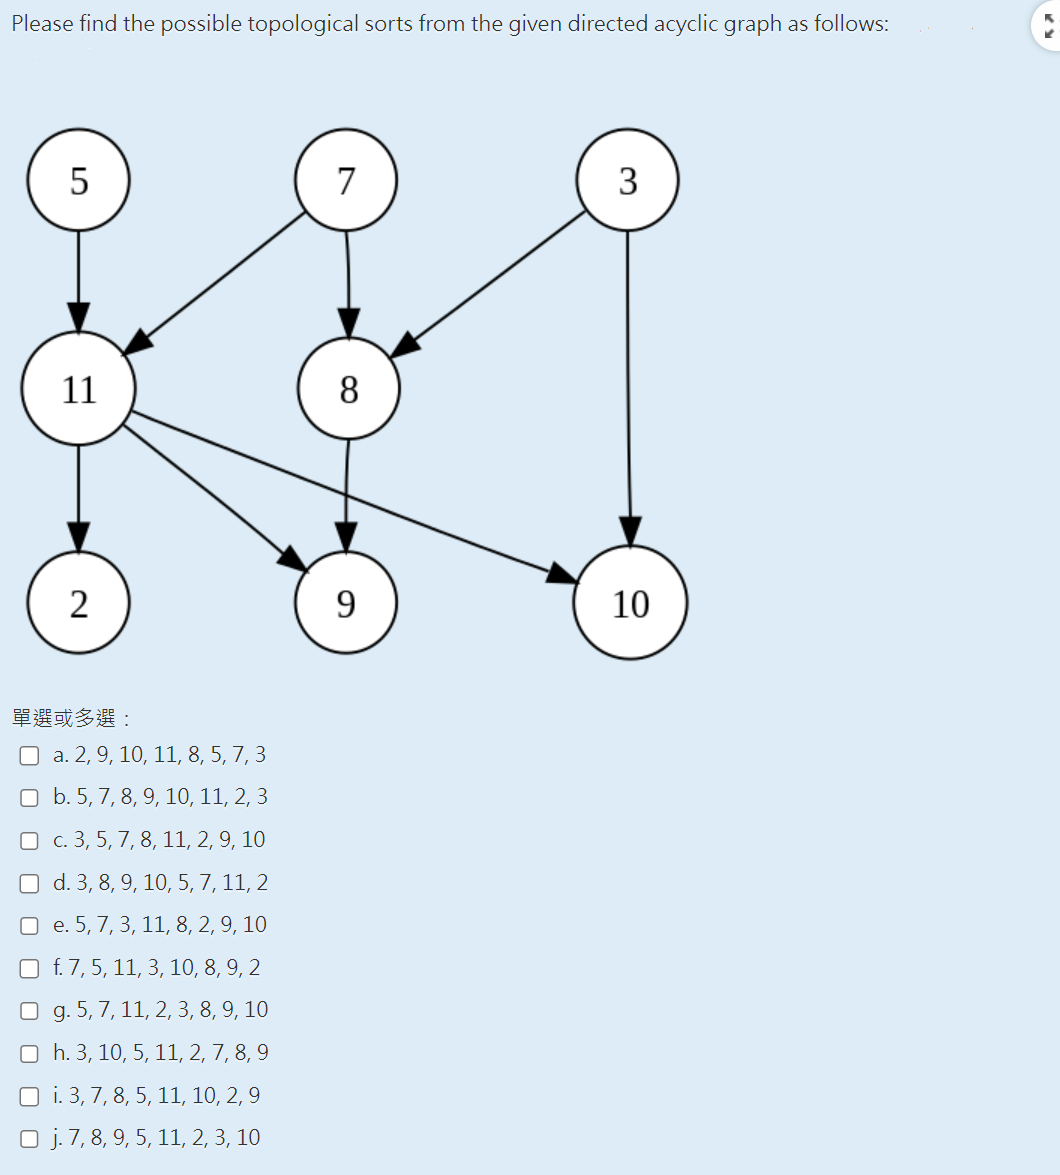 Please find the possible topological sorts from the given directed acyclic graph as follows:
5
11
2
單選或多選:
□ a. 2, 9, 10, 11, 8, 5, 7, 3
O b. 5, 7, 8, 9, 10, 11, 2, 3
O c. 3, 5, 7, 8, 11, 2, 9, 10
O d. 3, 8, 9, 10, 5, 7, 11, 2
O e. 5, 7, 3, 11, 8, 2, 9, 10
O f. 7, 5, 11, 3, 10, 8, 9, 2
O g. 5, 7, 11, 2, 3, 8, 9, 10
Oh. 3, 10, 5, 11, 2, 7, 8, 9
i. 3, 7, 8, 5, 11, 10, 2, 9
O j. 7, 8, 9, 5, 11, 2, 3, 10
7
8
9
3
10